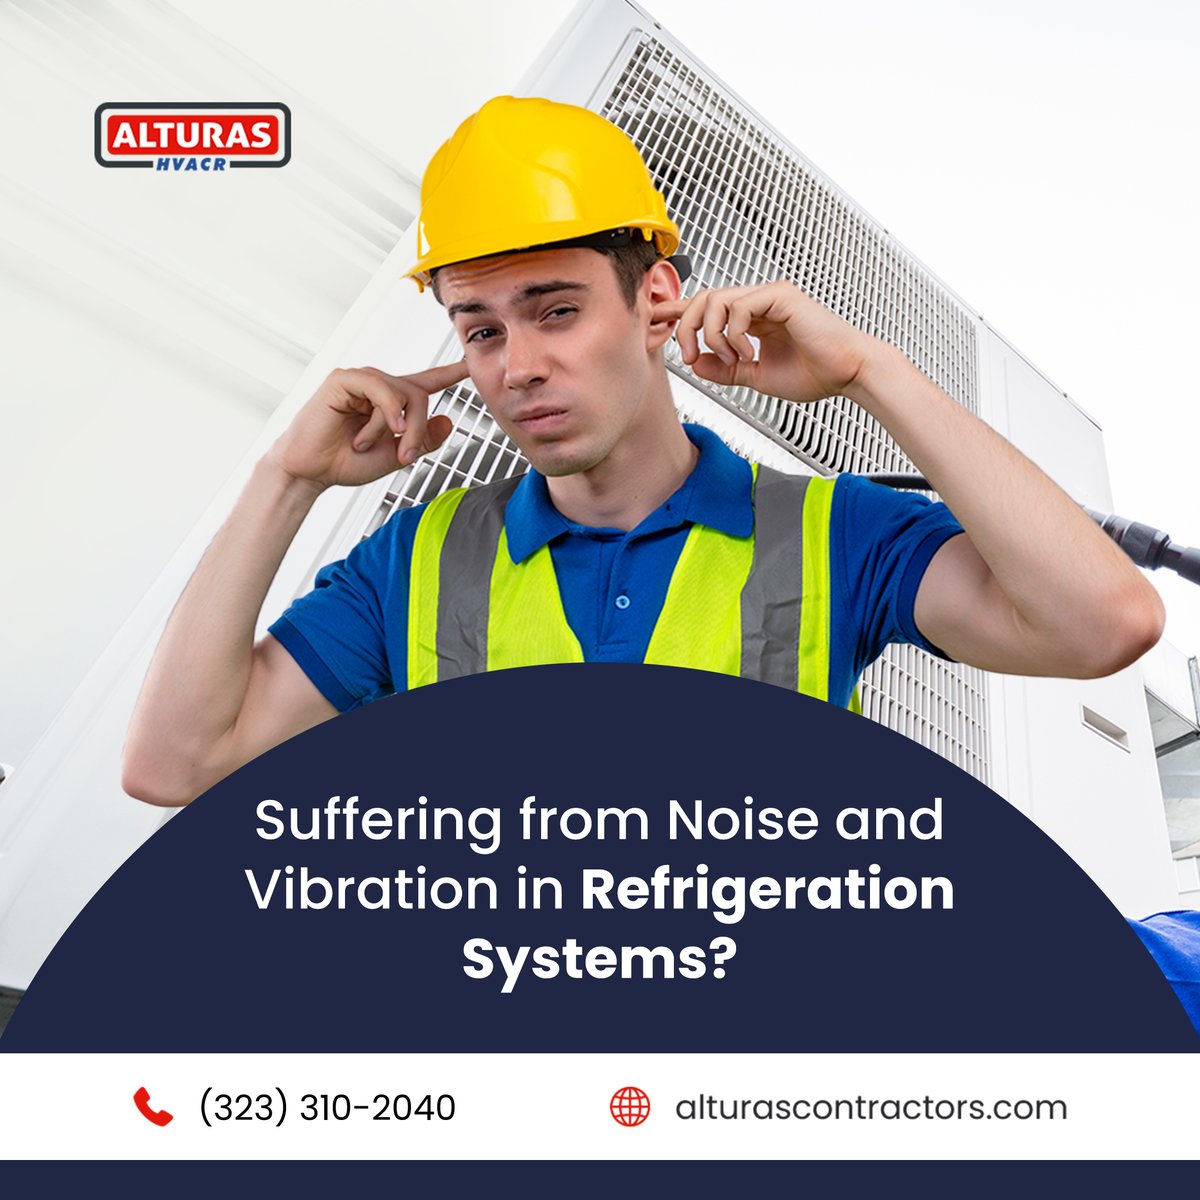 Tired of the noise in your refrigeration systems? 

alturascontractors.com/hvac/refrigera…

#commercialrefrigeration #refrigeration #refrigeracion #hvac #hvacr #chestfreezer #refrigerationtech #islandfreezer #refrigeracioncomercial #refrigeracionindustrial